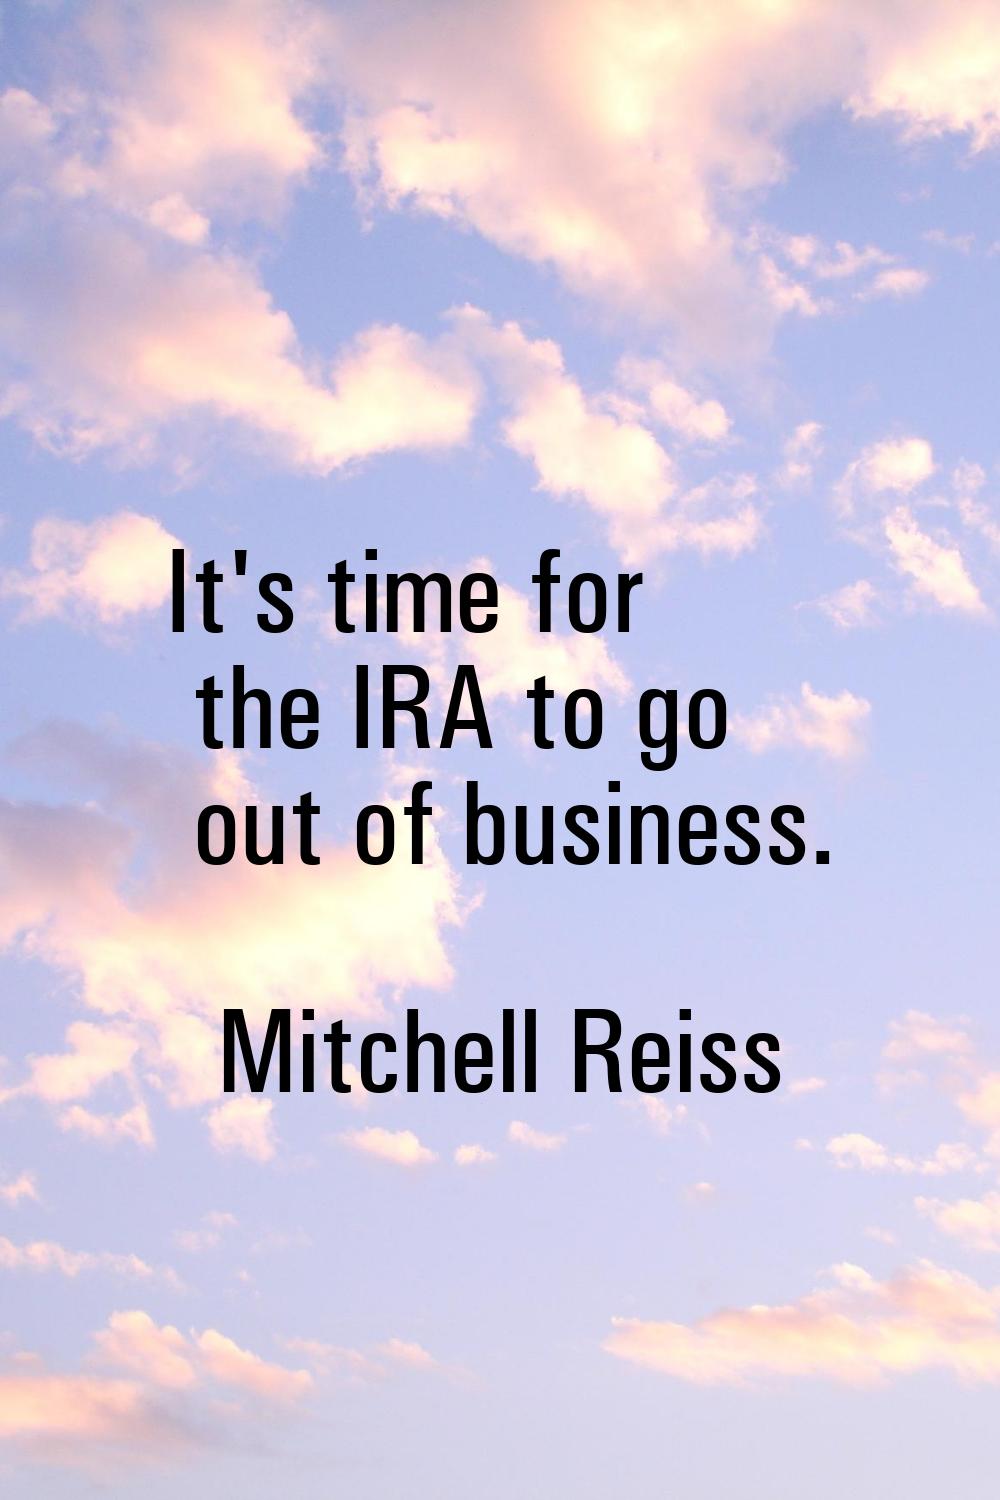 It's time for the IRA to go out of business.